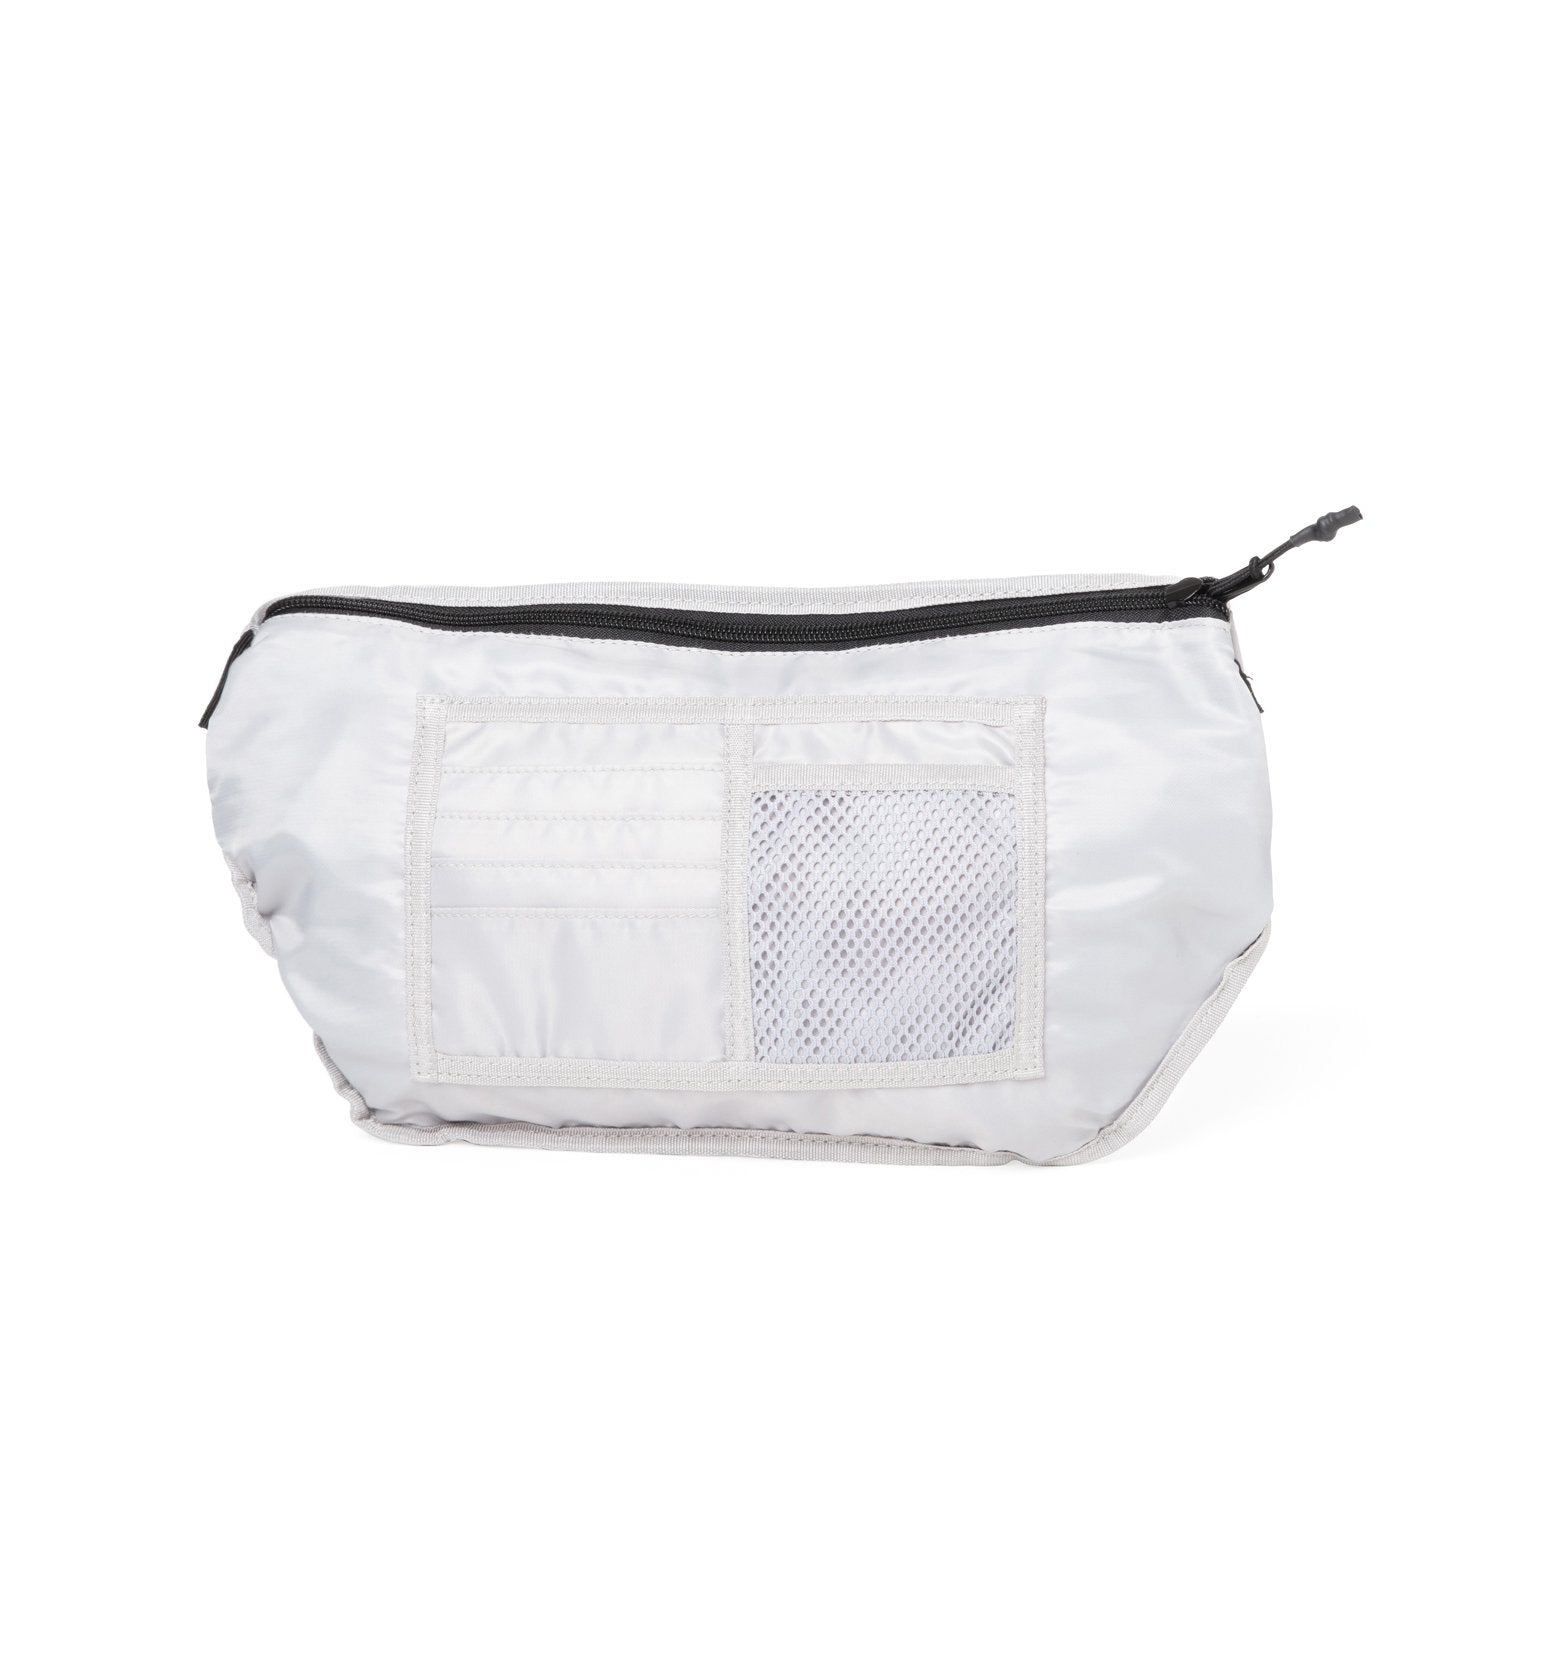 Picture of a Nylon Black Fanny Pack